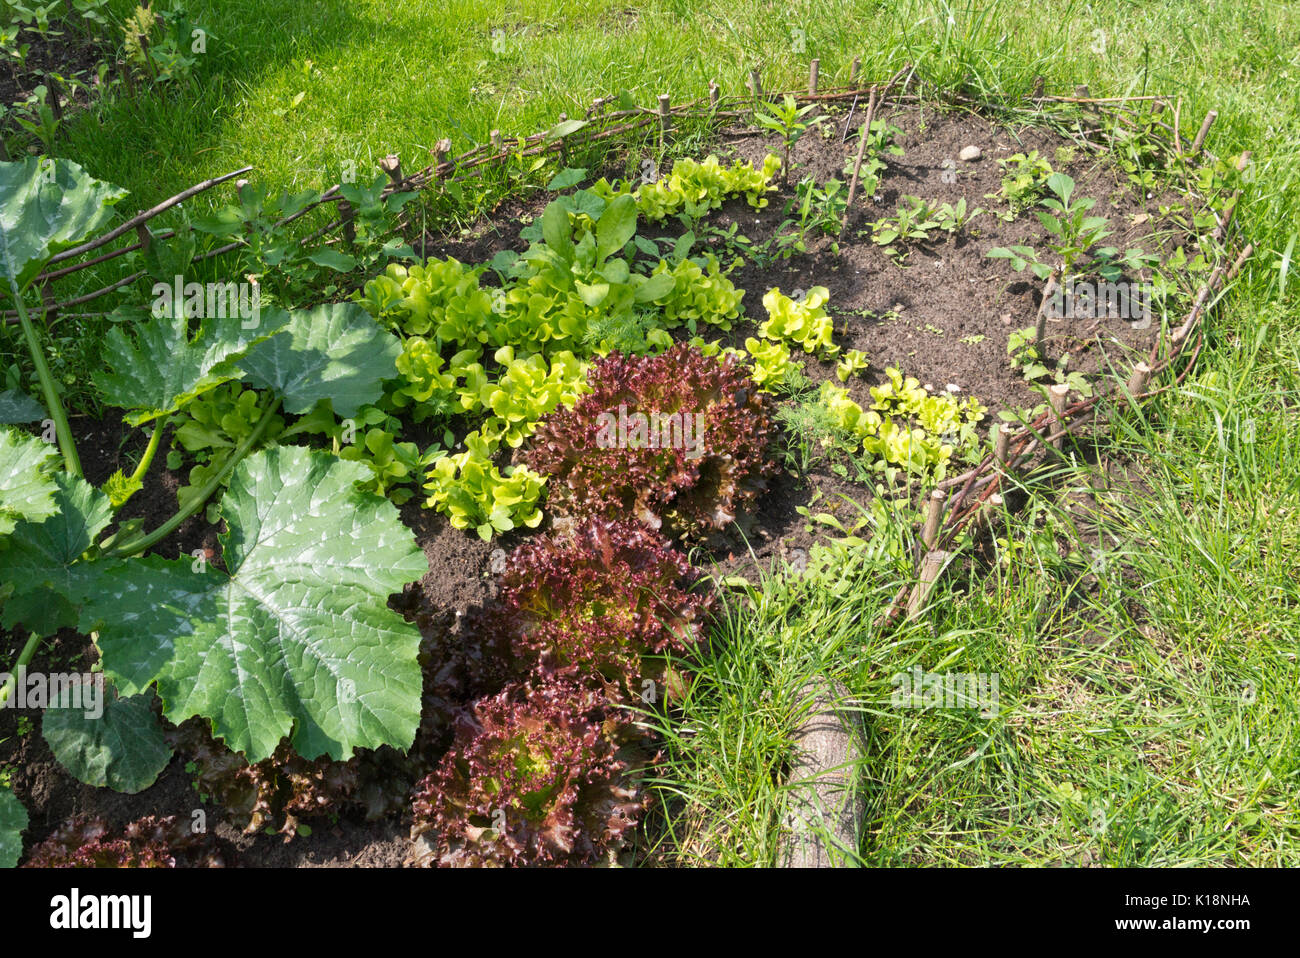 Vegetable bed with enclosure Stock Photo